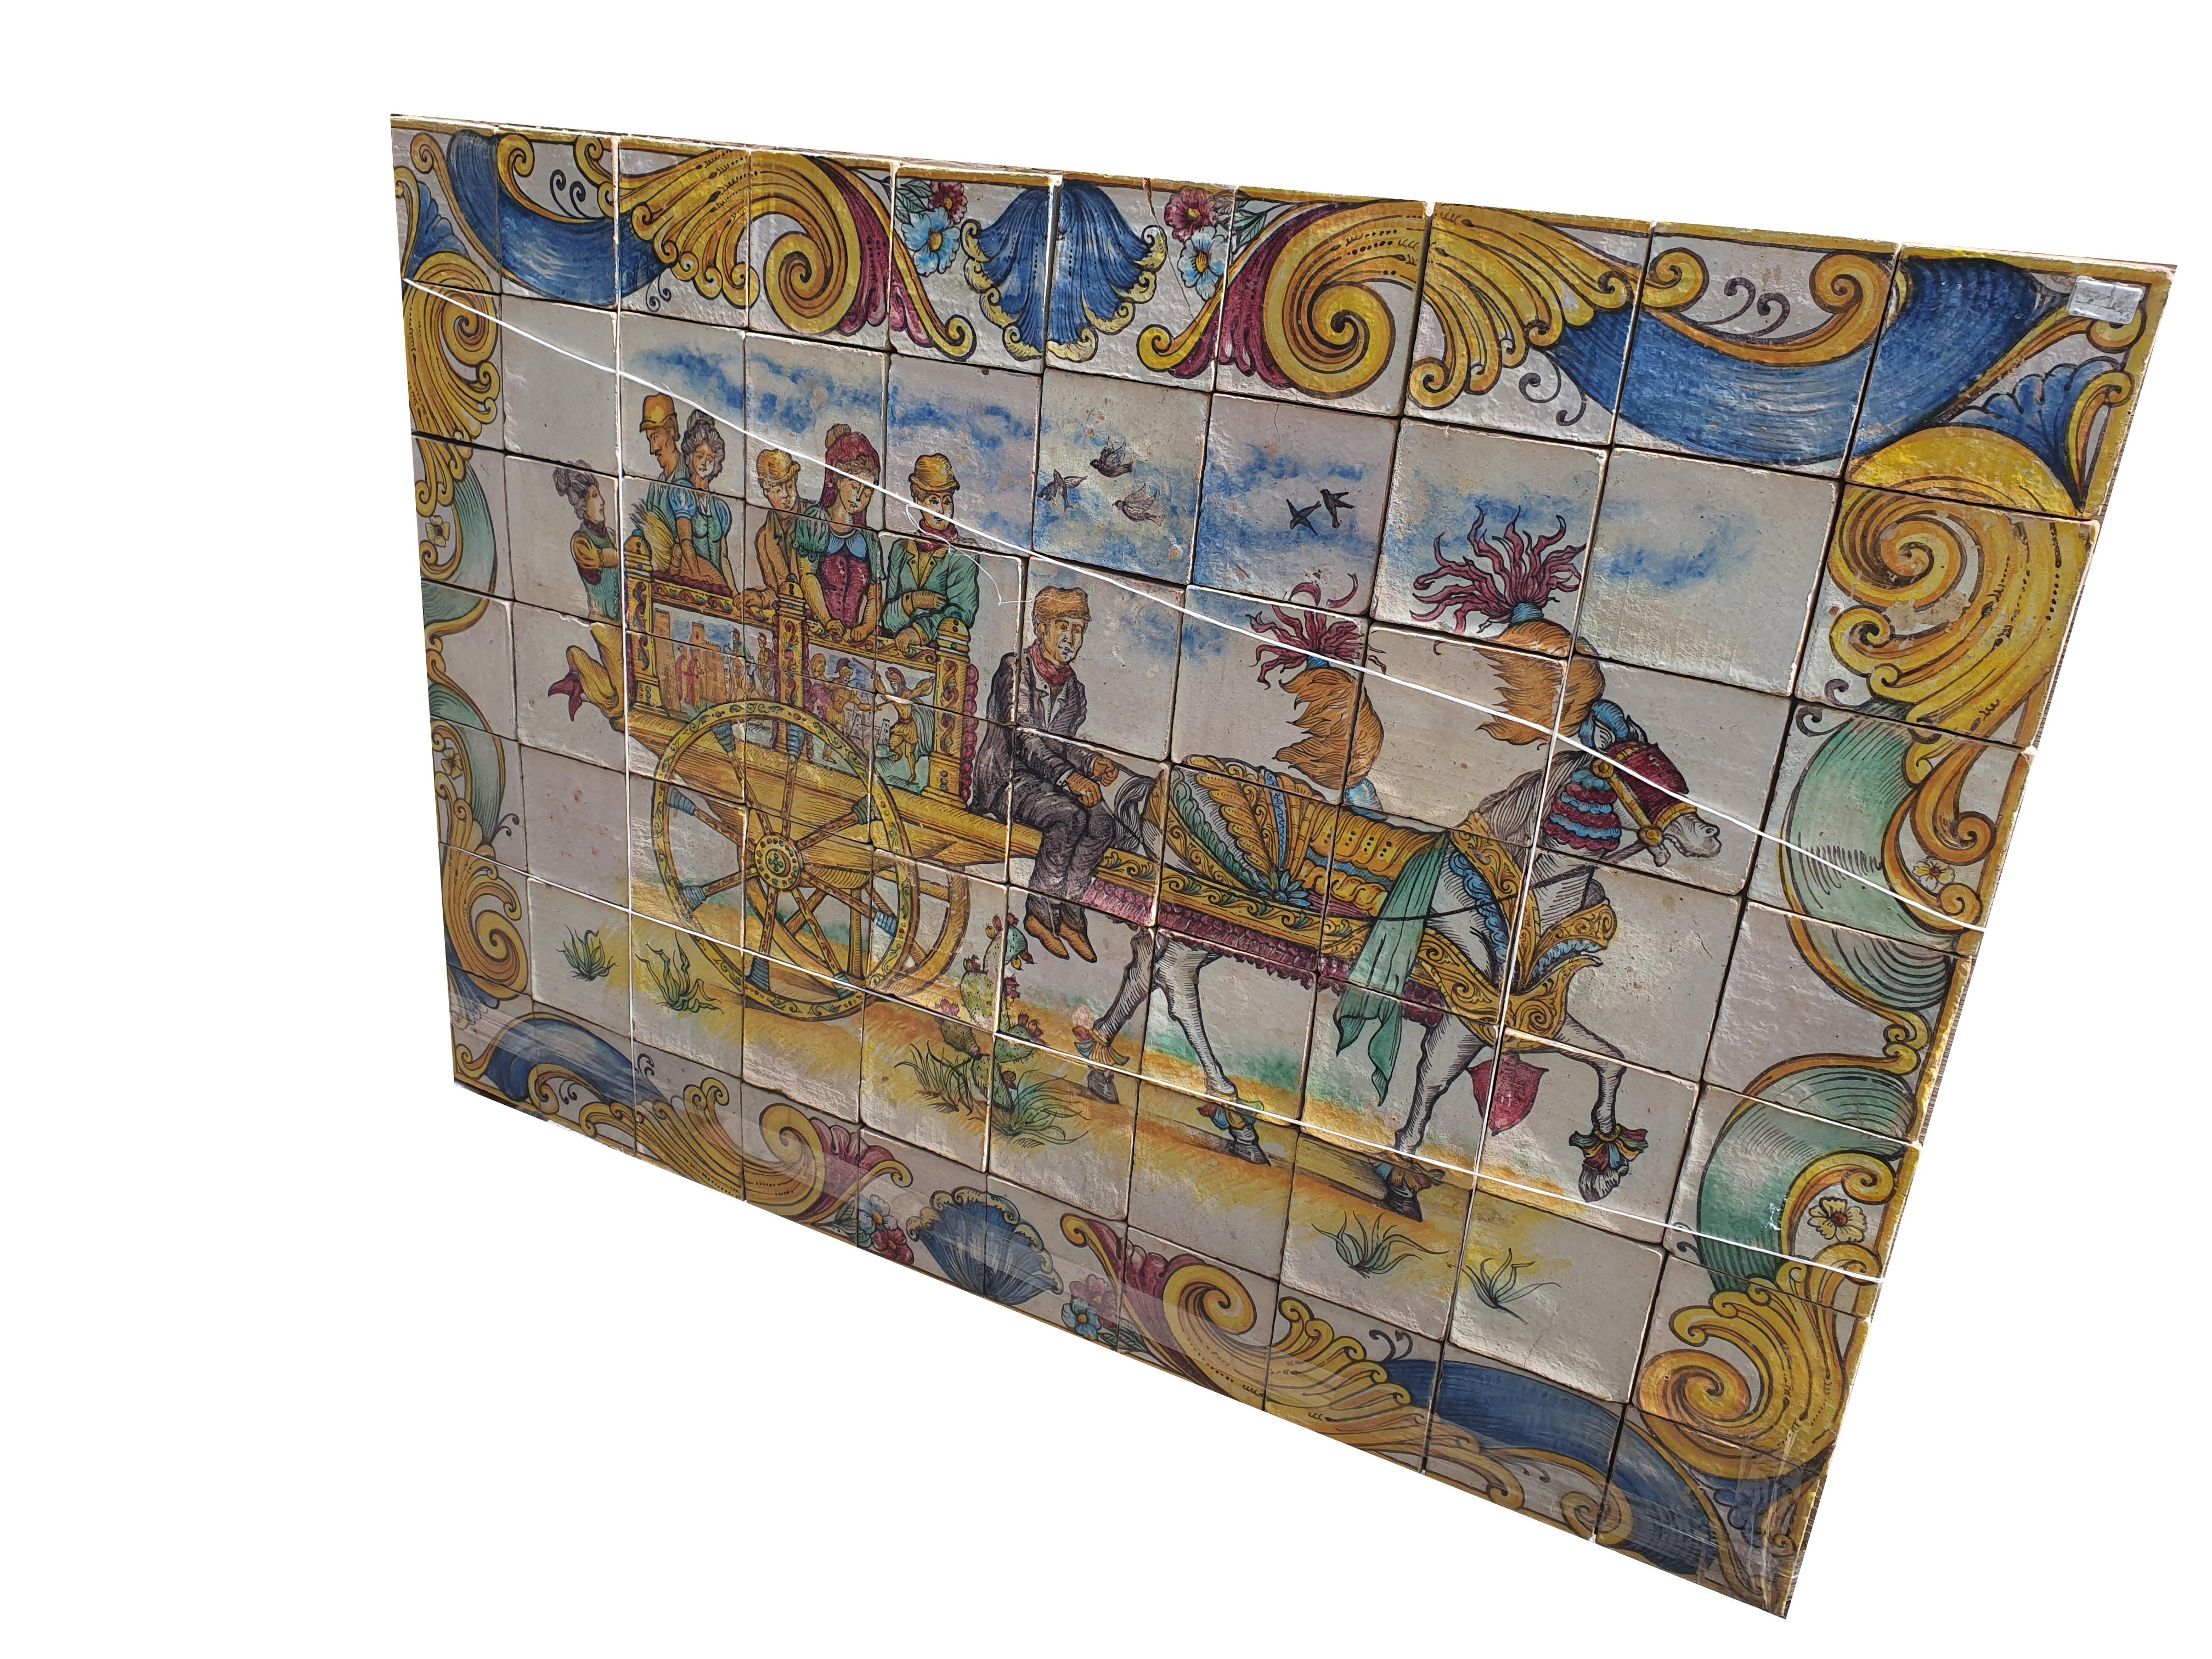 Painted majolica Sicilian terracotta panel, depicting the iconic 